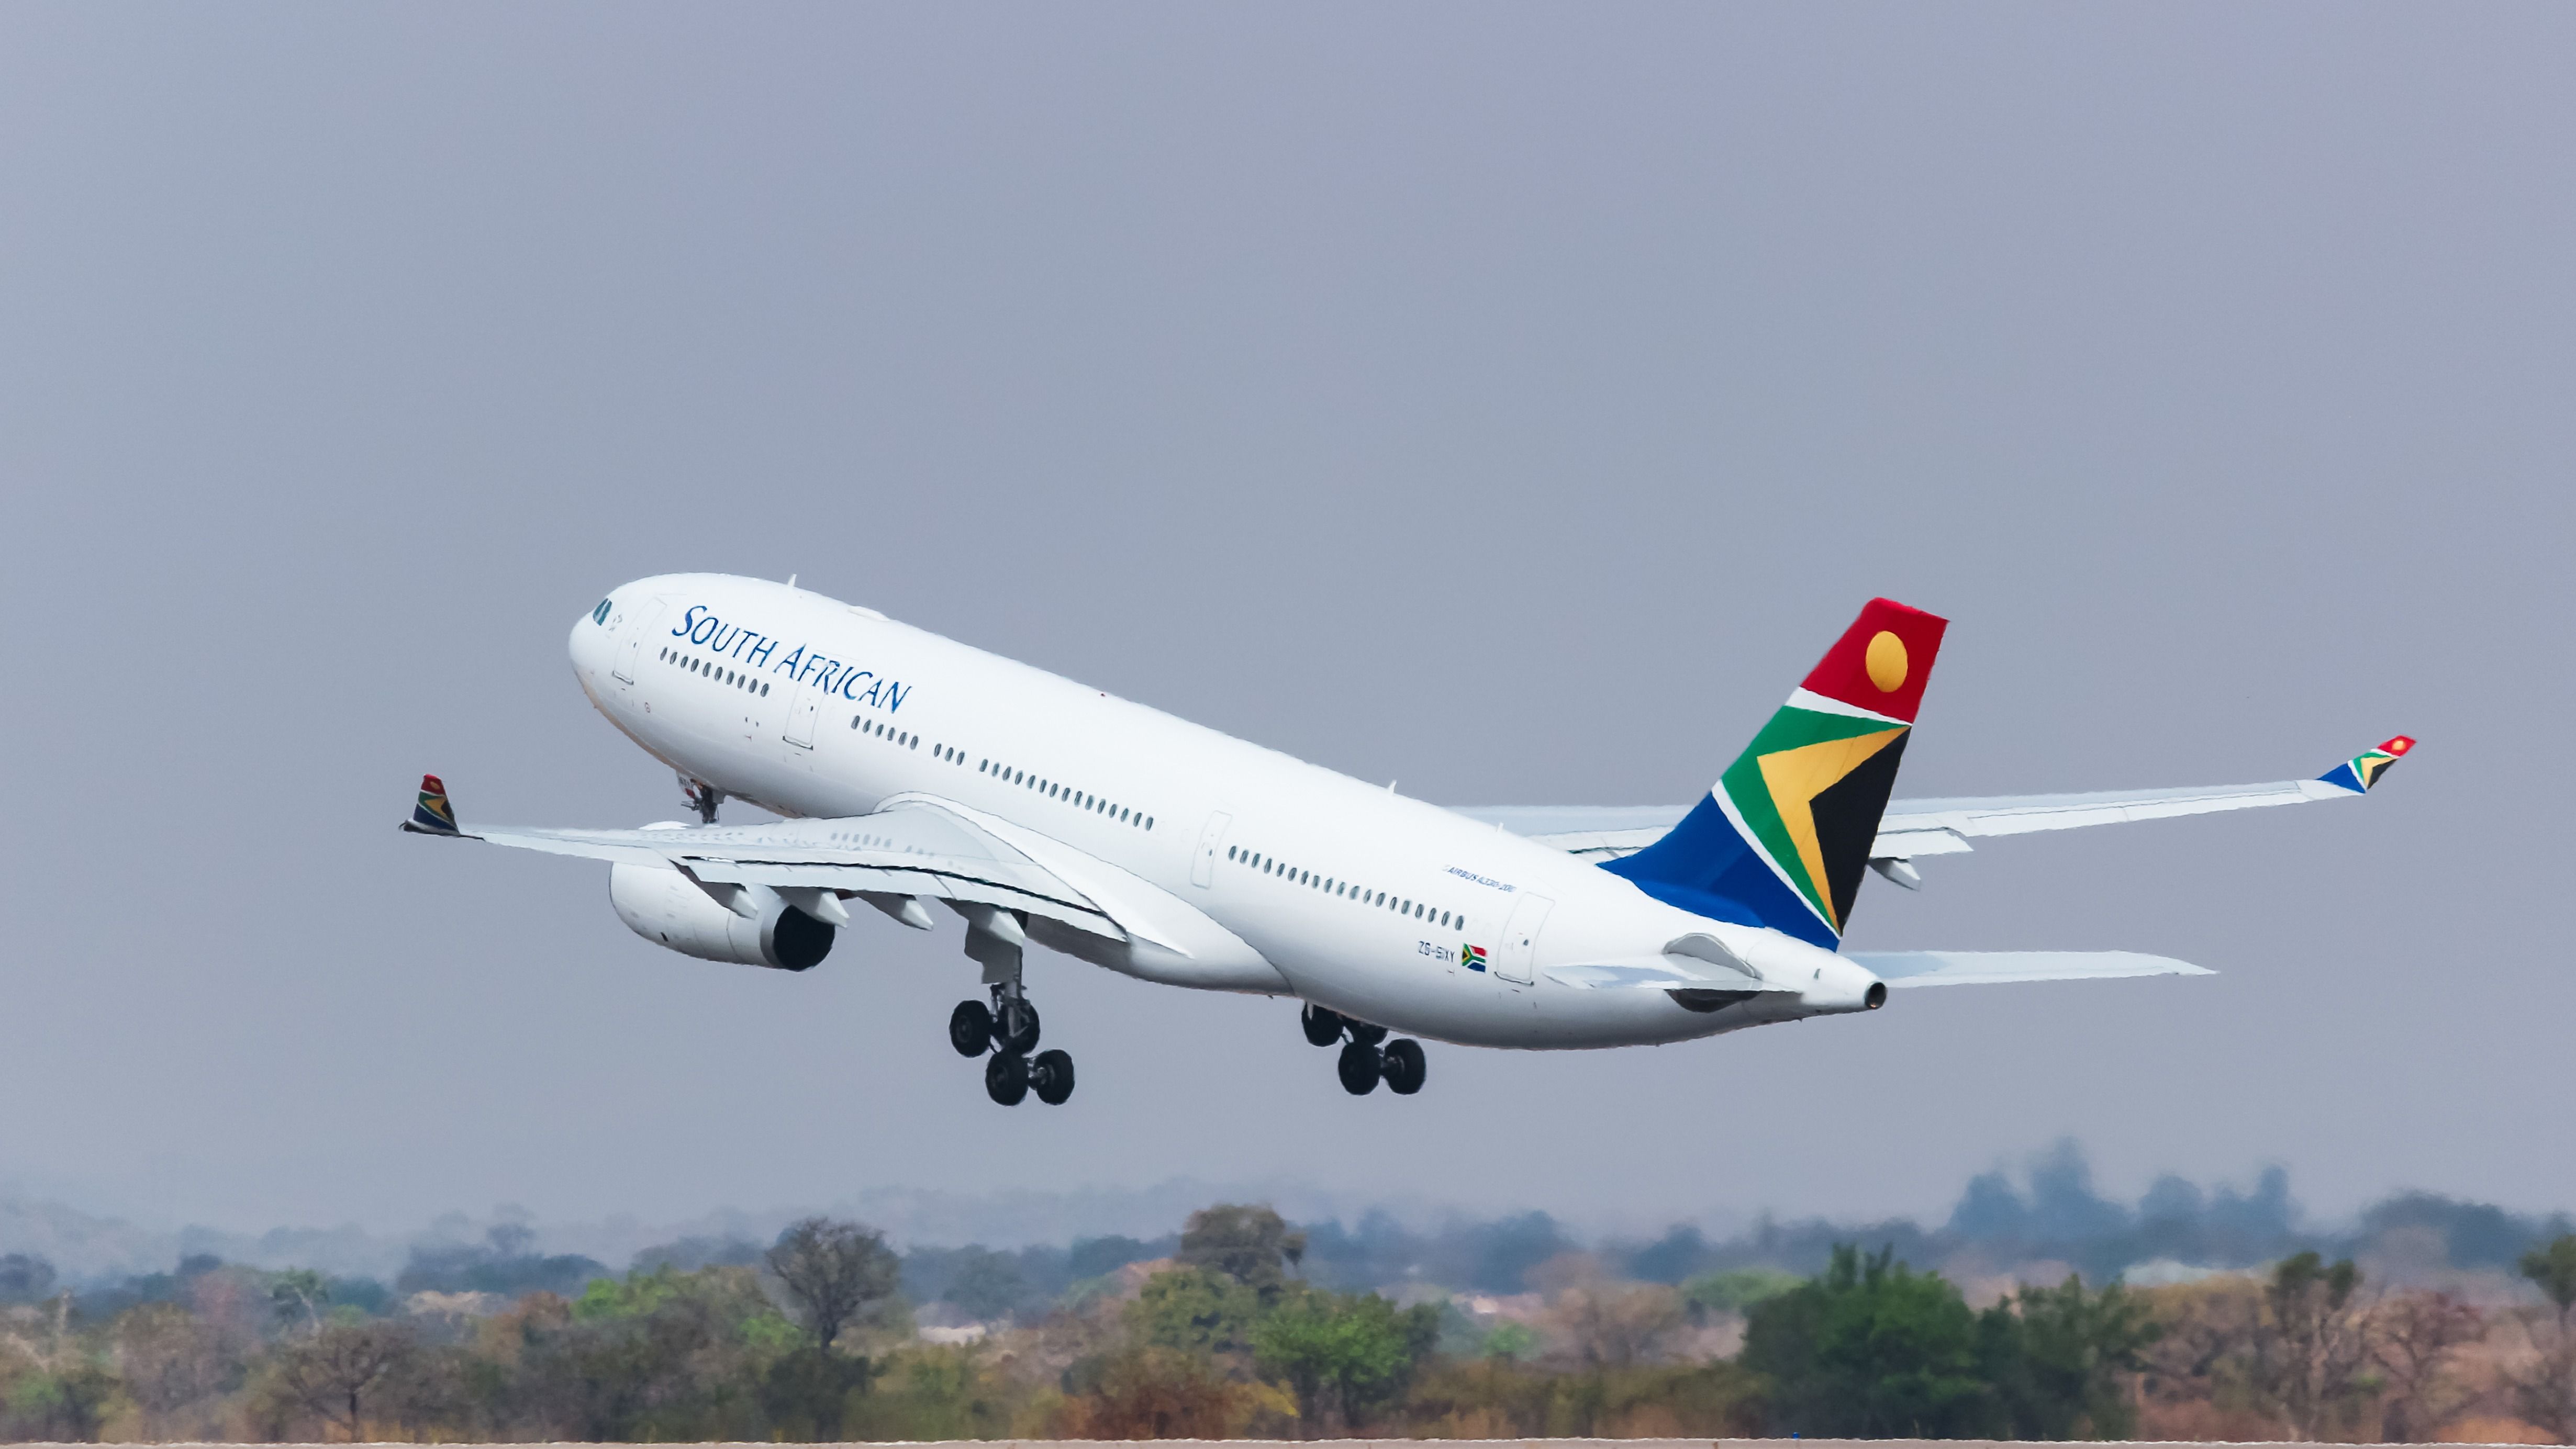 South African Airways Airbus A330 aircraft